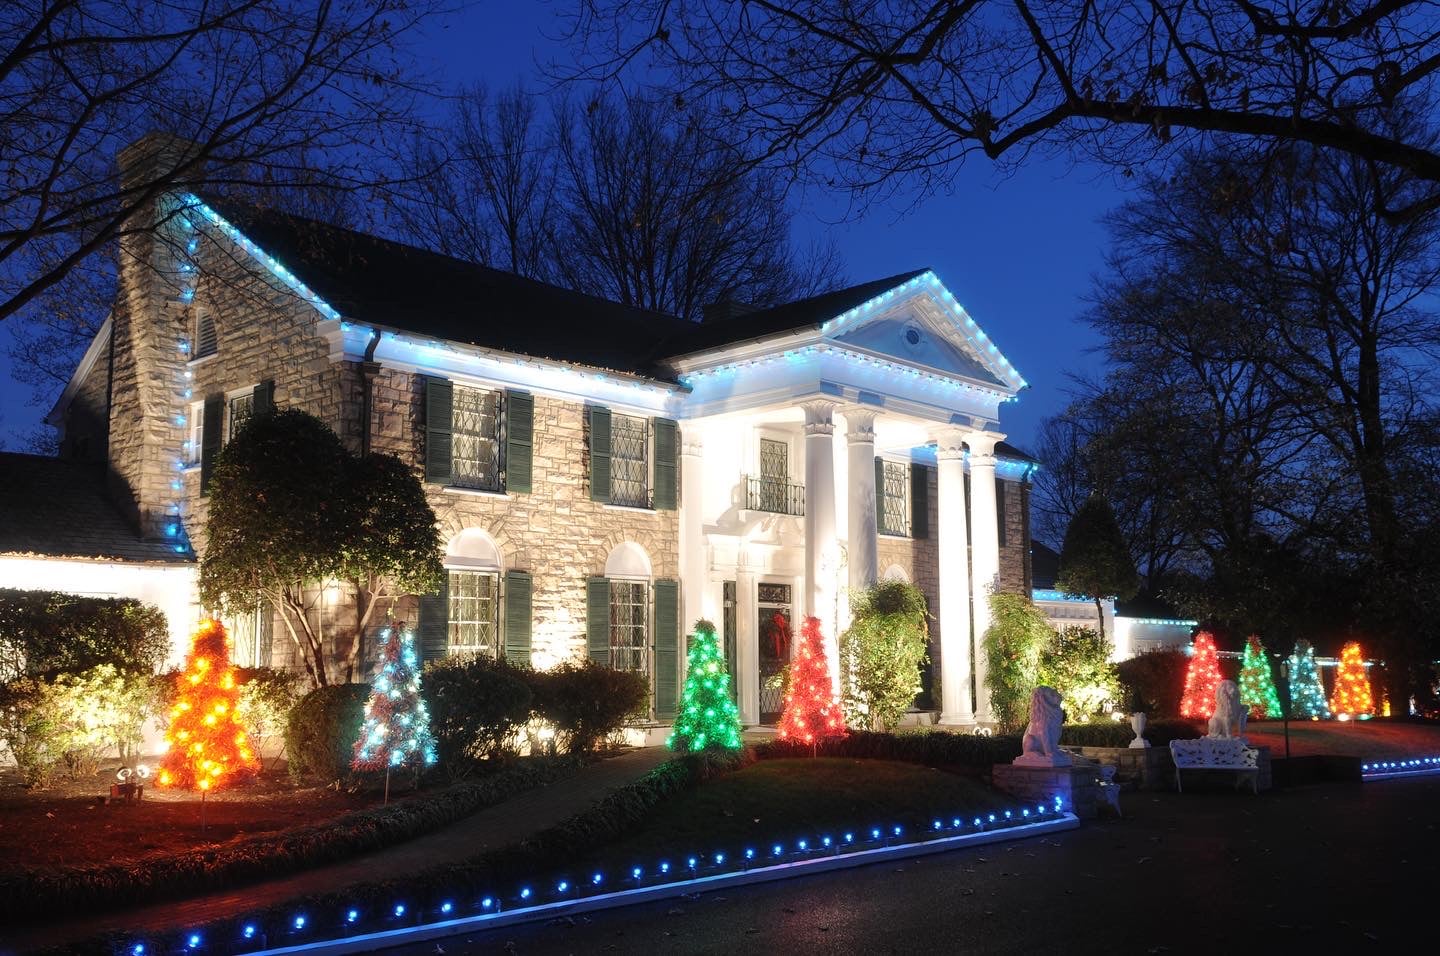 Graceland at Christmas time